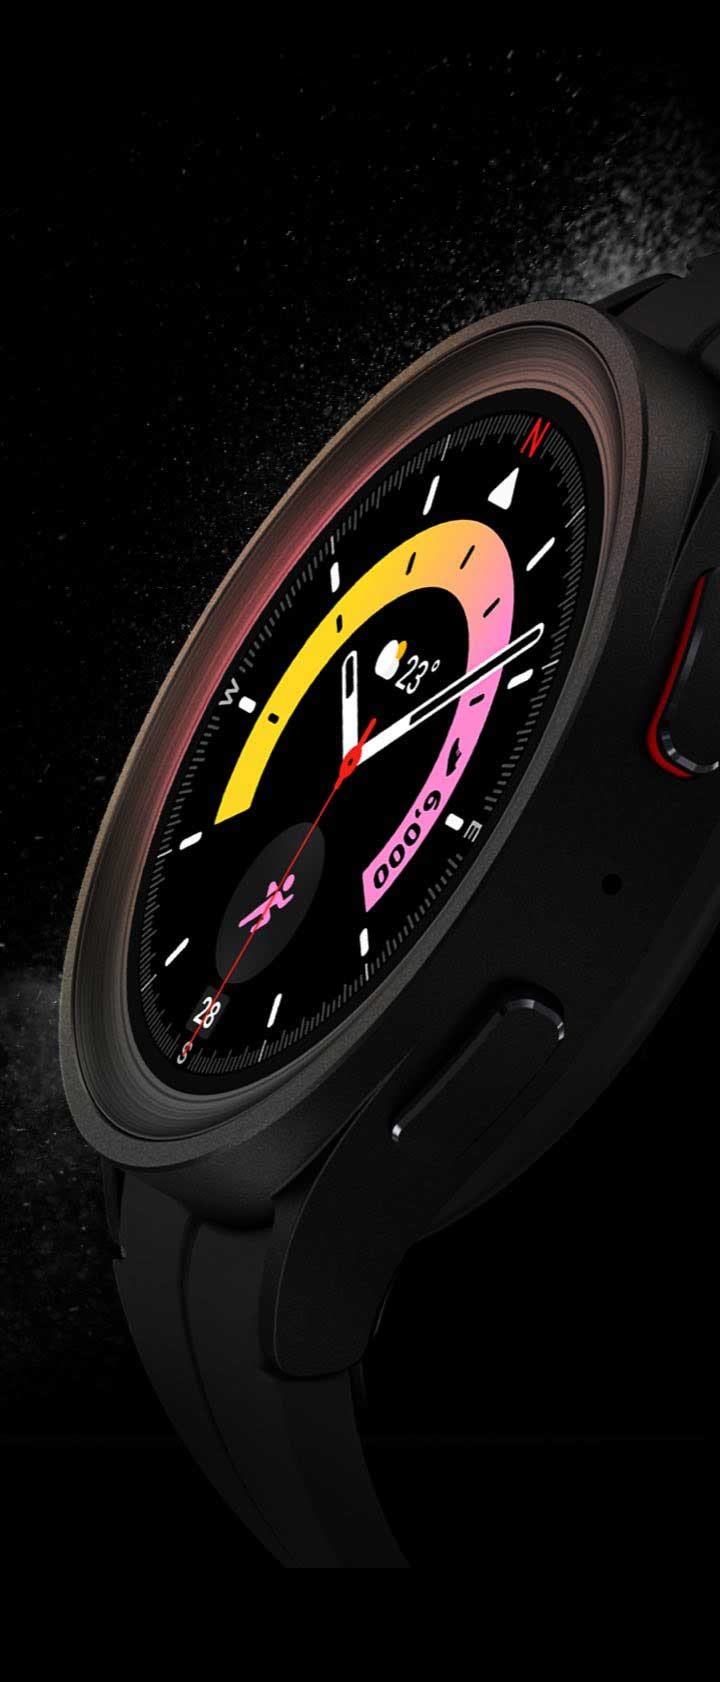 Meet Galaxy Watch5 Pro - A durable GPS watch for the adventurer in you